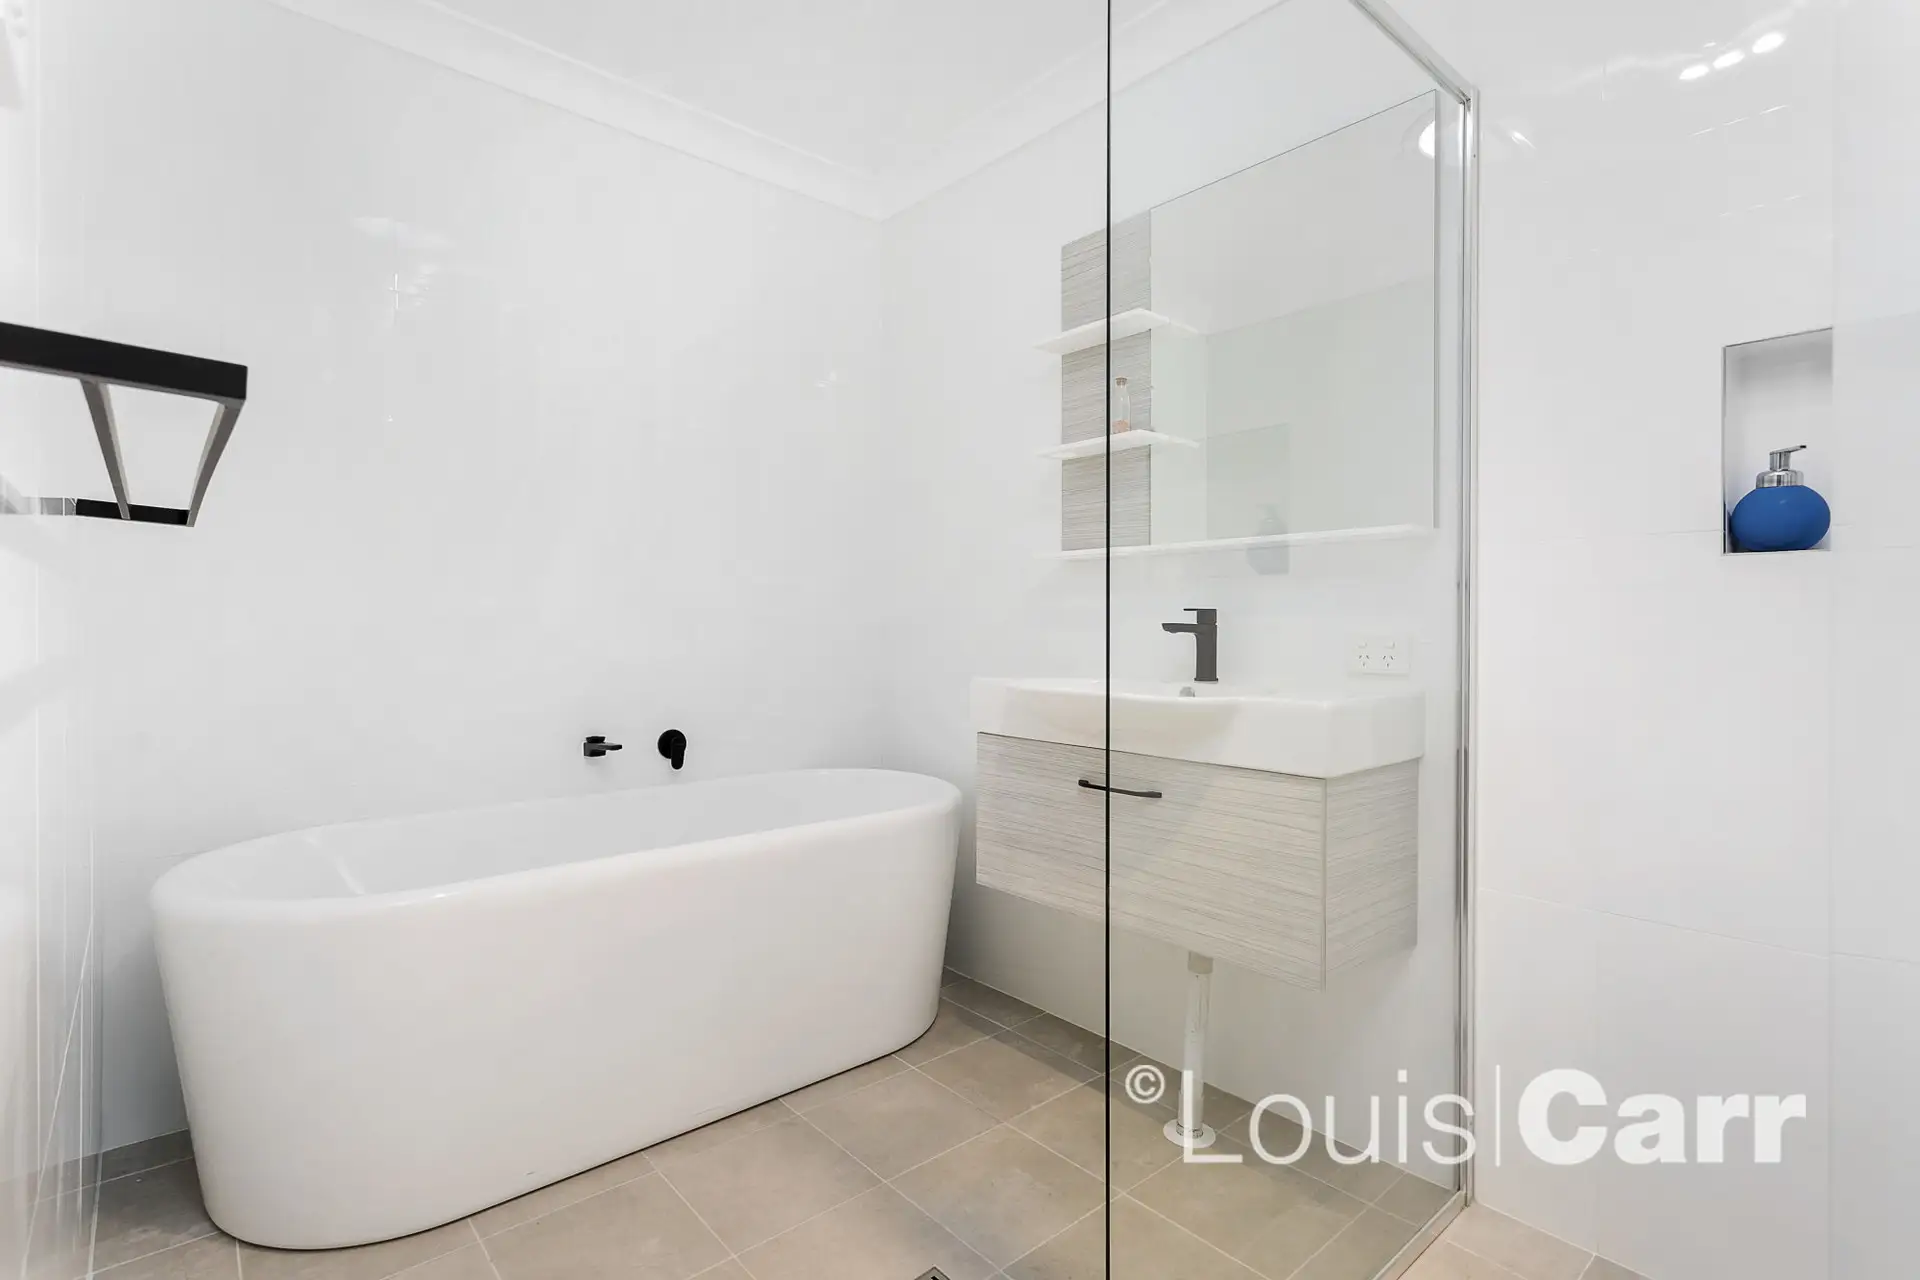 44 Millcroft Way, Beaumont Hills Sold by Louis Carr Real Estate - image 3